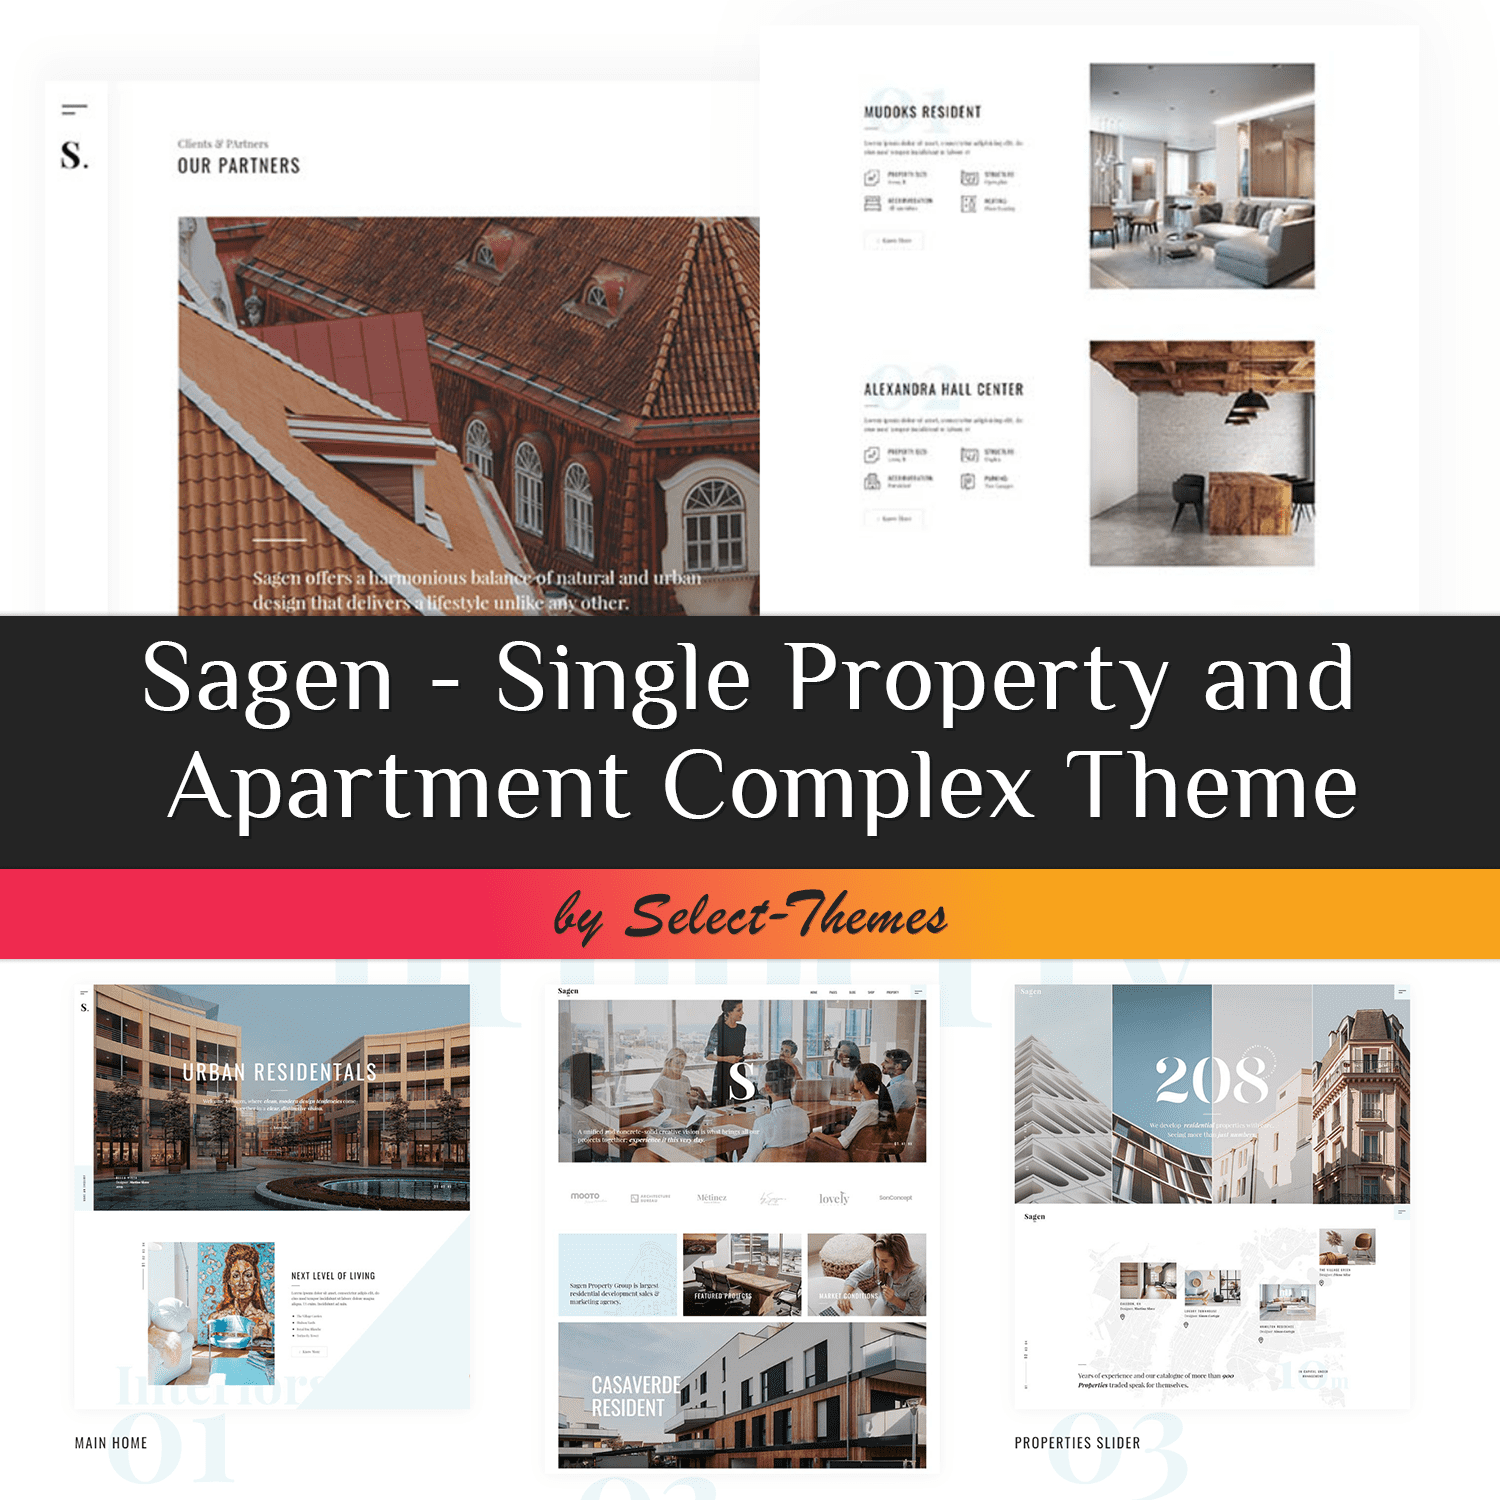 Sagen - Single Property And Apartment Complex Theme Cover.